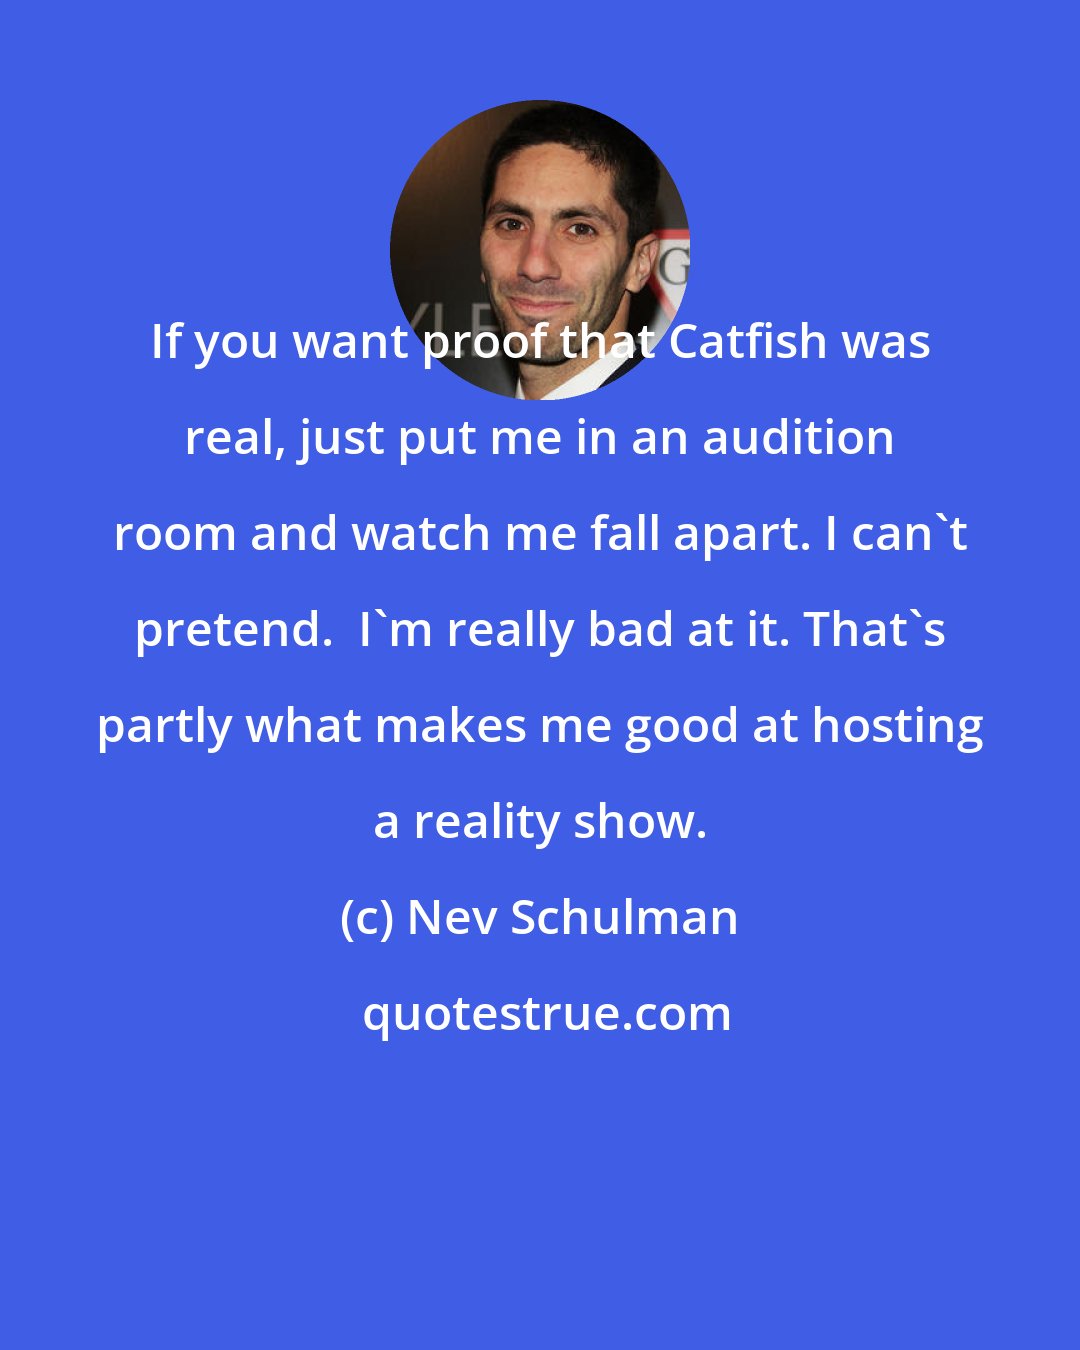 Nev Schulman: If you want proof that Catfish was real, just put me in an audition room and watch me fall apart. I can't pretend.  I'm really bad at it. That's partly what makes me good at hosting a reality show.